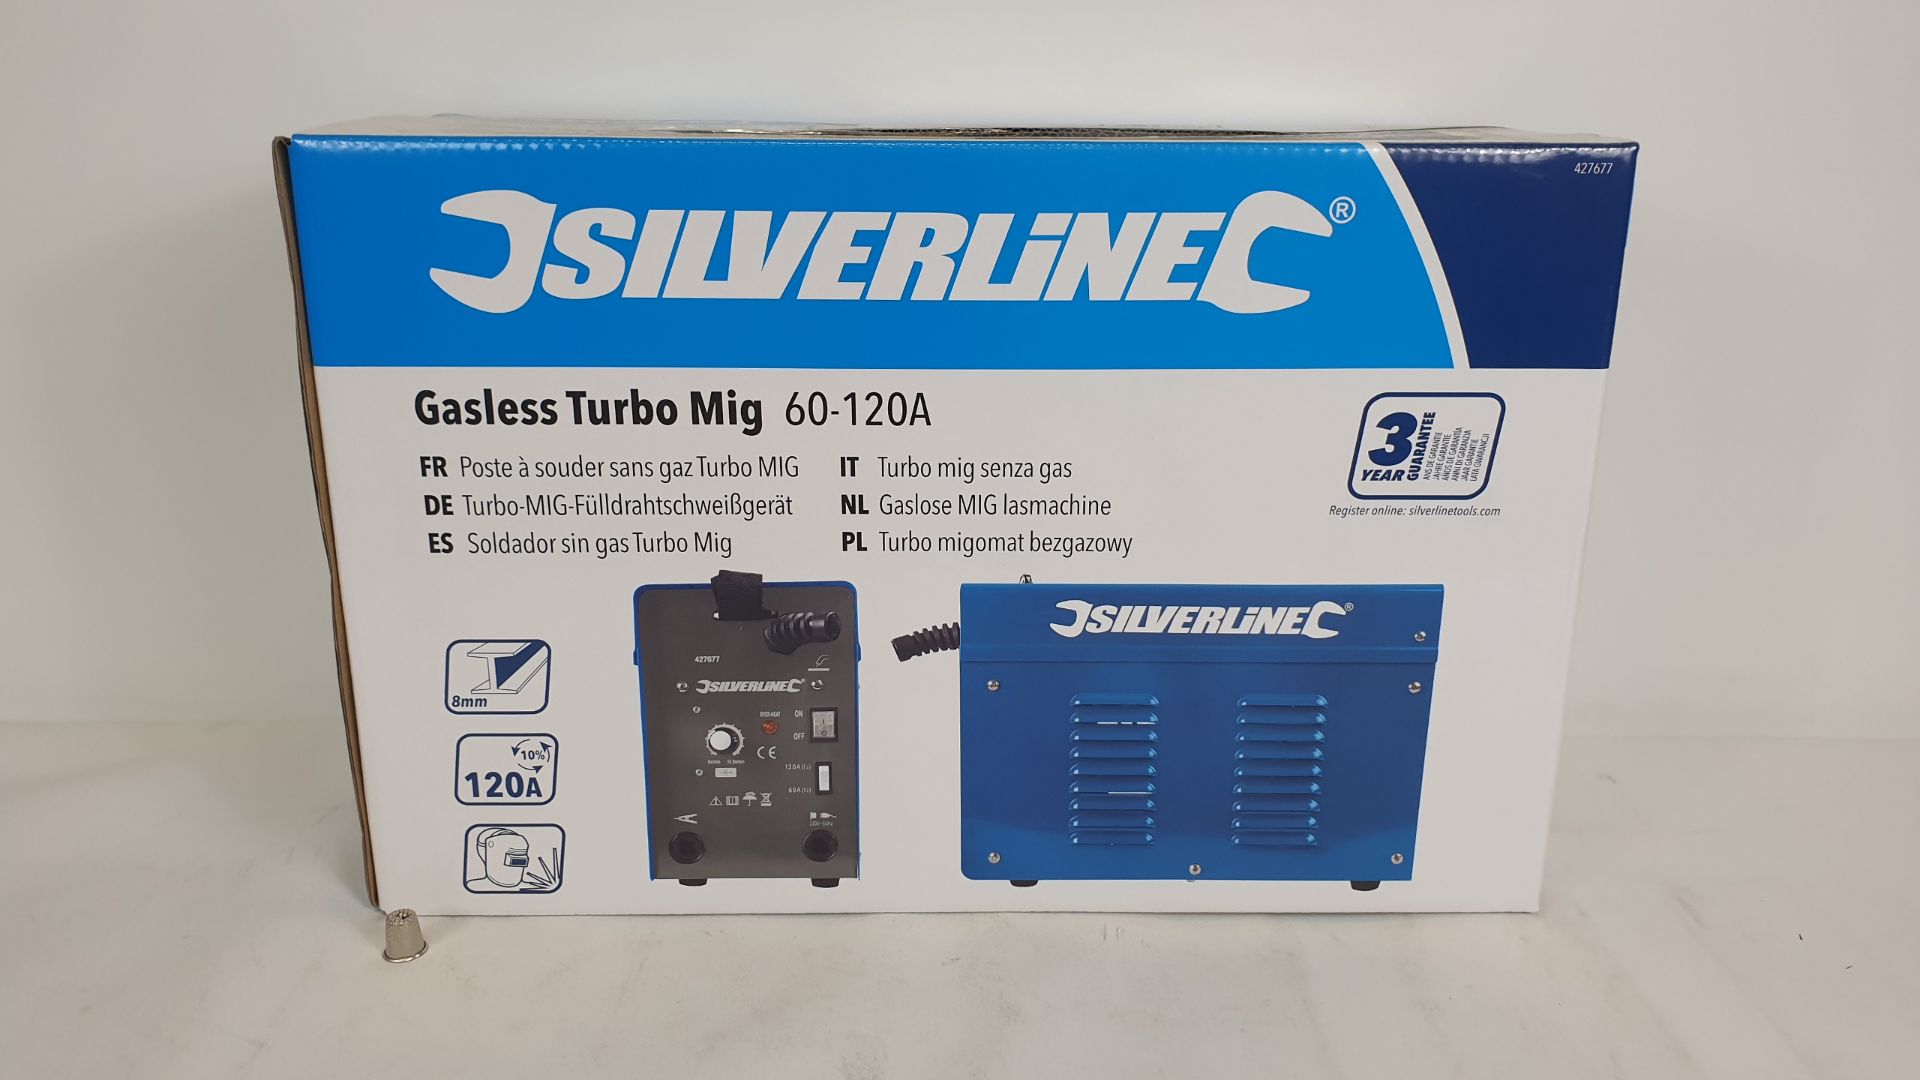 BRAND NEW BOXED SILVERLINE GASLESS TURBO MIG WELDING SET 60 - 120A (PRODUCT CODE 427677)